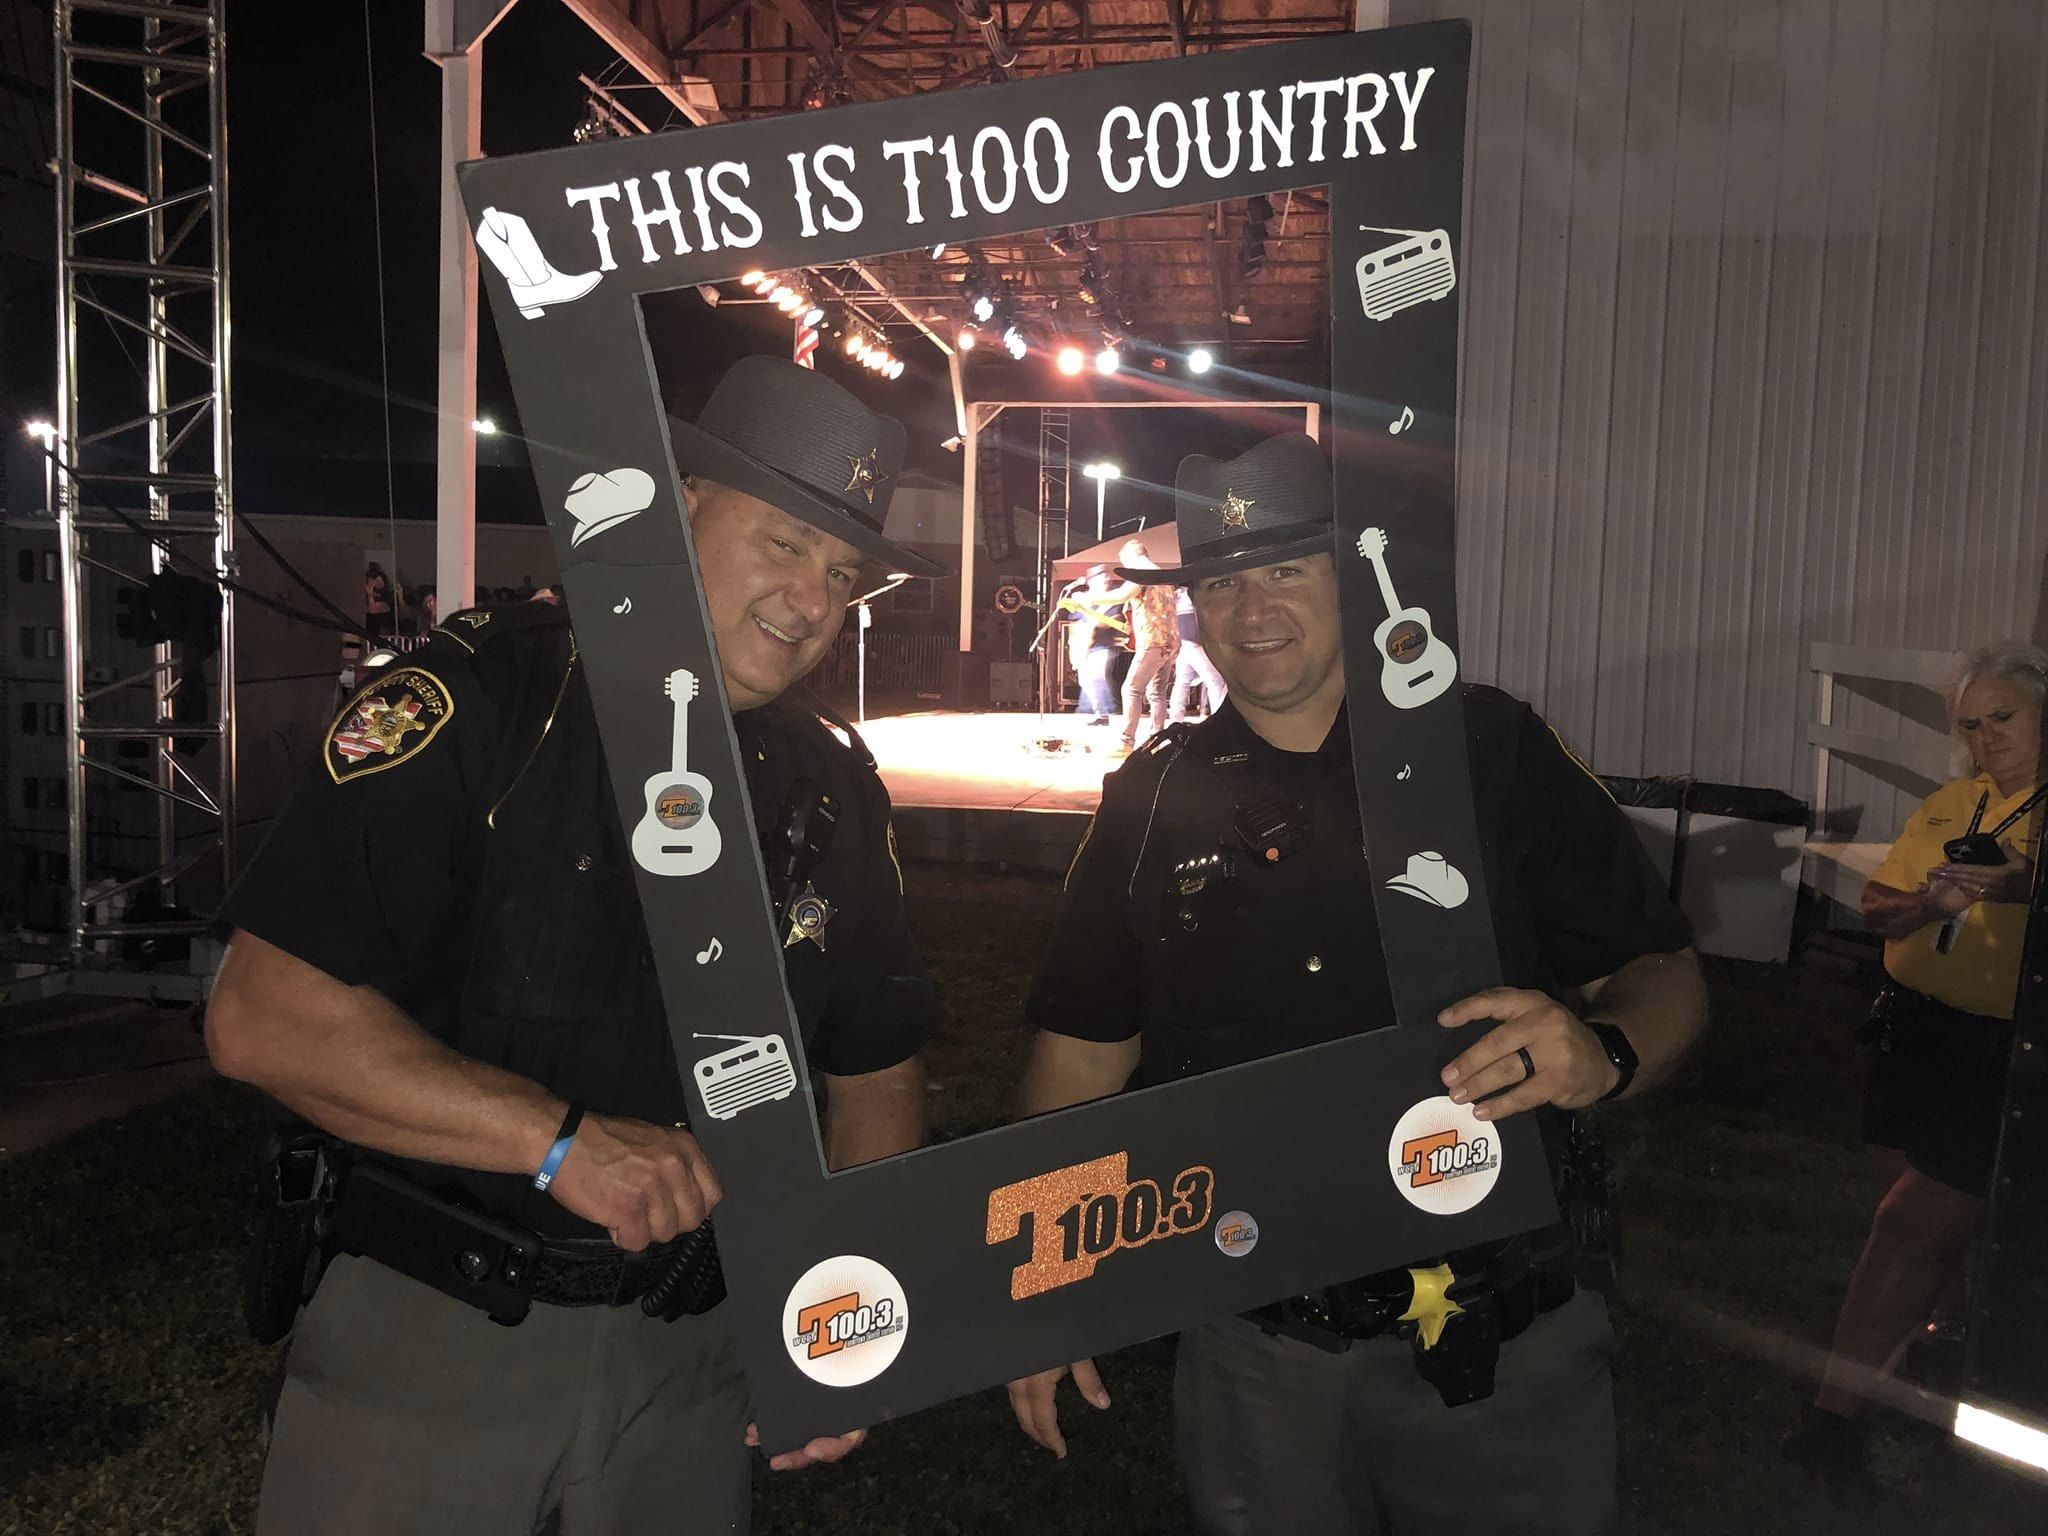 sheriffs with a country sign